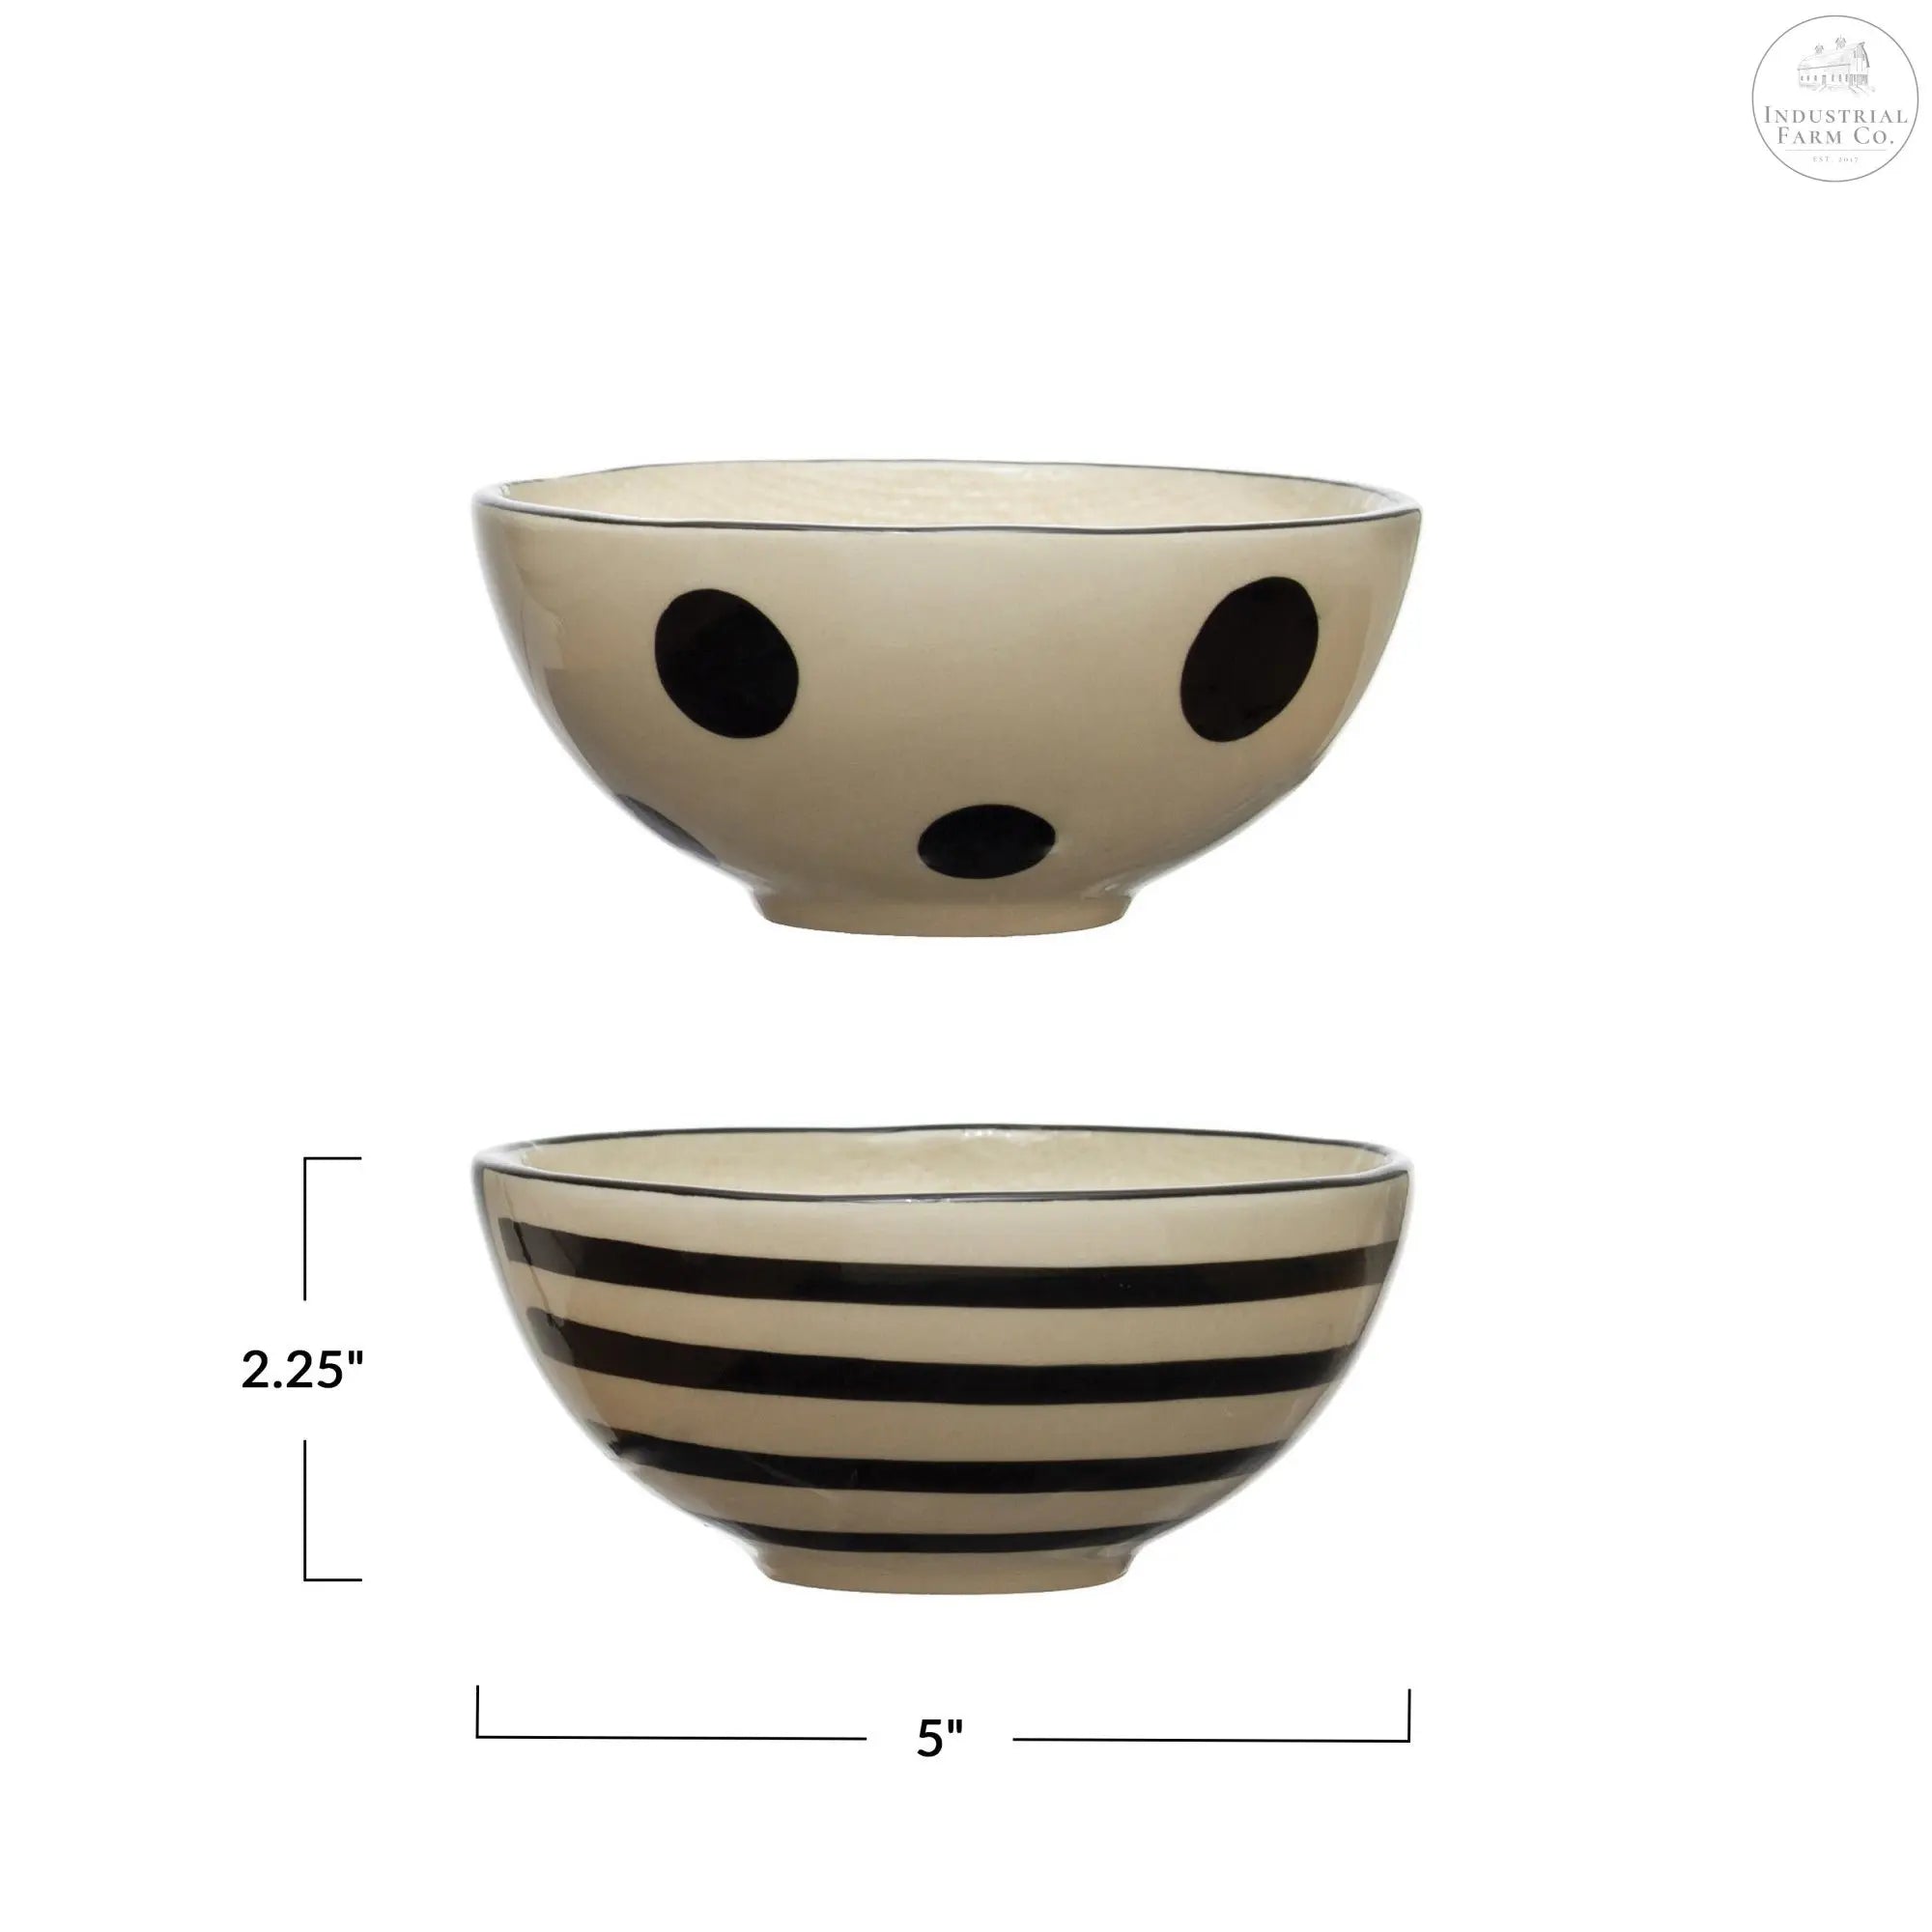 The Walker Hand Painted Bowl  Stripes   | Industrial Farm Co